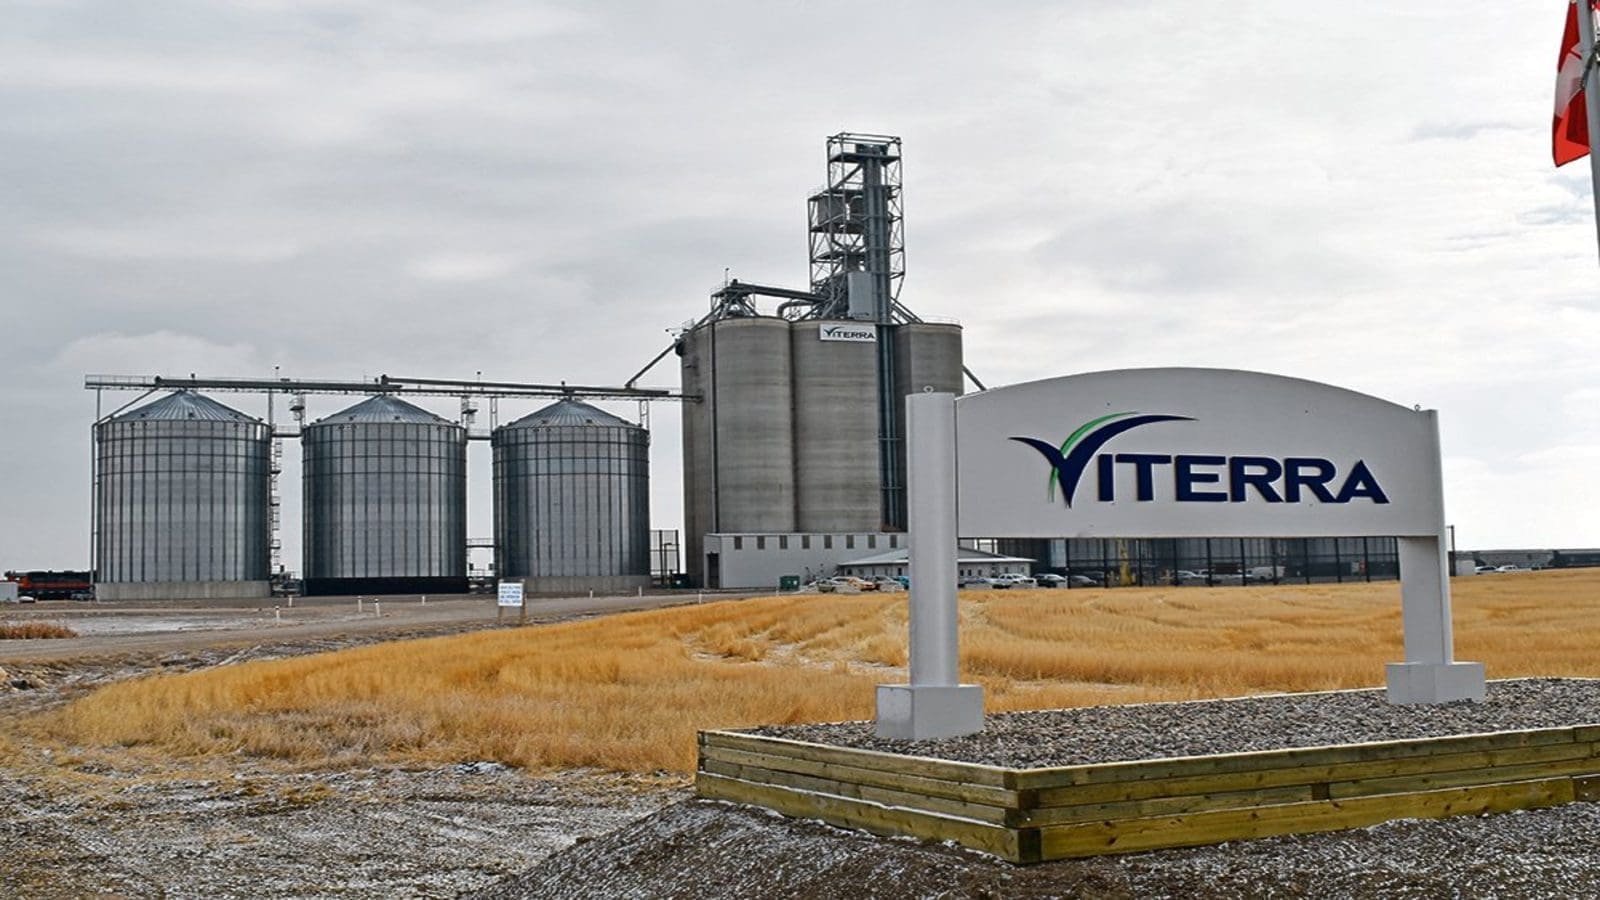 Viterra bolsters sustainable agriculture commitments with new goal to achieve carbon net-zero by 2050